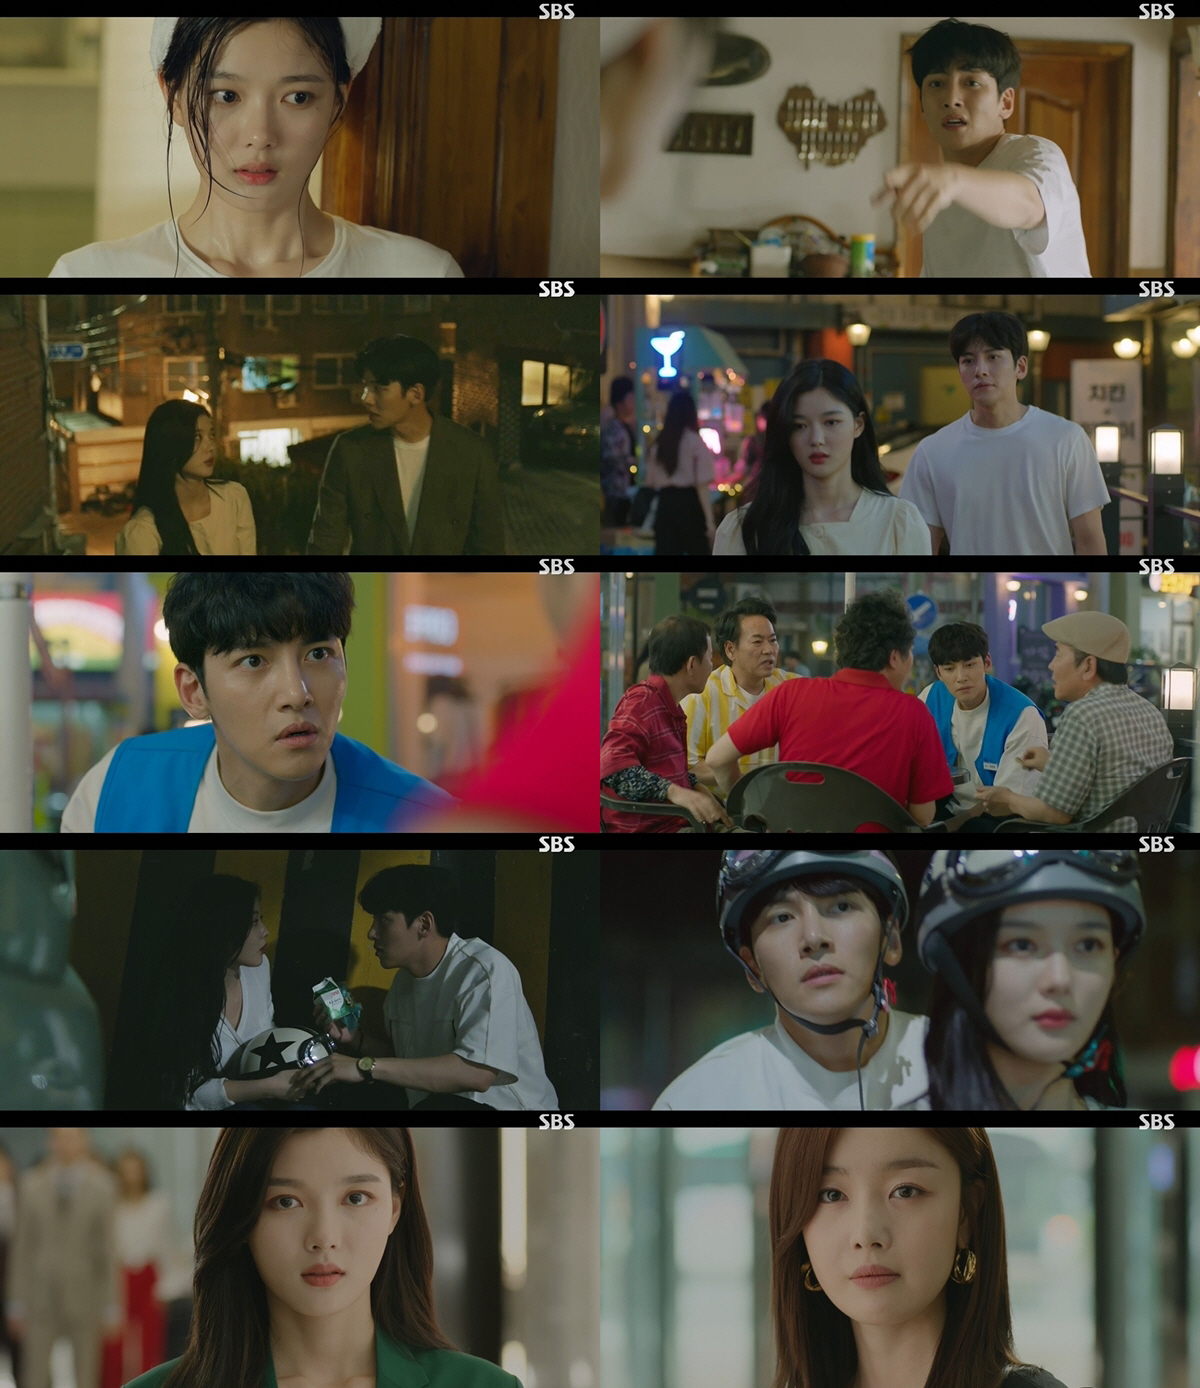 11 broadcast of planetin the definition included a Gore by(Kim Yoo-jung)is a flexible space(Han Sunhwa) in front of Choi Dae-heon(JI Chang Wook)towards sincere confession to appear. The point sir the wound if you cannot see seems to bethe cloud saving of stone fastball Provisional Government of the Republic of Kor the forward three peoples relationship, how will the viewers attention focused.This day included a Gore by Choi Dae-heon at the home of living together was. Choi Dae-heon is jumping and cloud saving and one house of the flesh was denied, but if you dont want meis a house of absolute power mA most-Hee(Kim Sun-Young)is determined to follow was forced. The information included a Gore by a real estate Scam do you know there is Choi Dae-heon is cloud saving special on how to network home,said the eyes to give definition included a Gore by standing down to.These Choi Dae-heon is the late government included a Gore by a real estate Scam you had to hear that happened. Its fast and exciting, and Choi Dae-heon is regret and cloud saving special feel sorry. Since Choi Dae-heon is cloud saving by fraud to your realtor in order to catch someone ahead of her. Neighborhood days combined fathers friends information and dormant until it was.Information cloud saving is so hard with Choi Dae-heon this thank you and, on the one hand to change yourself well for Choi Dae-heon this good worries were. Choi Dae-heon is I of the threat to the South, and I once was nicknamed the furnace was. Mind eat well to completely meltand pretentious, but I really cloud saving special to worry about wearing and caring deep heart, and what was felt.This background information included a Gore is a flexible space that Choi Dae-heon and view were Opera performances, Seung-Joon(road), this with saw the fact that I notice it. Information cloud saving is flexible in store like that fact, and I fall when two minutes in, theres nothing to say that sincerely believed in,he said. This however, the store Manager how much value the person you are not the people that get kicked should be the same. Points for a wound you cannot see seems to be if you had.Choi Dae-heon this how warm a person you know and like that cloud saving special, so mind the viewers as it was. So Choi Dae-heon truly think that cloud saving and unlike today, the flexibility that Choi Dae-heon and the difference between real and final in rocking to kiss up to appear. Choi Dae-heon for that cloud saving, by the flexibility of the upper half of the look forward of these relationships is what will happen to your right to pay attention to.The broadcast said. Choi Dae-heons house to find flexible space is cloud saving by Choi Dae-heon and lives in a house that has beenWas the Metropolitan household viewership 9. 8%(Part 2, What standard) per minute, the highest viewership of 10. Up to 4% up. 2049 viewership Station 4. 7% showed.